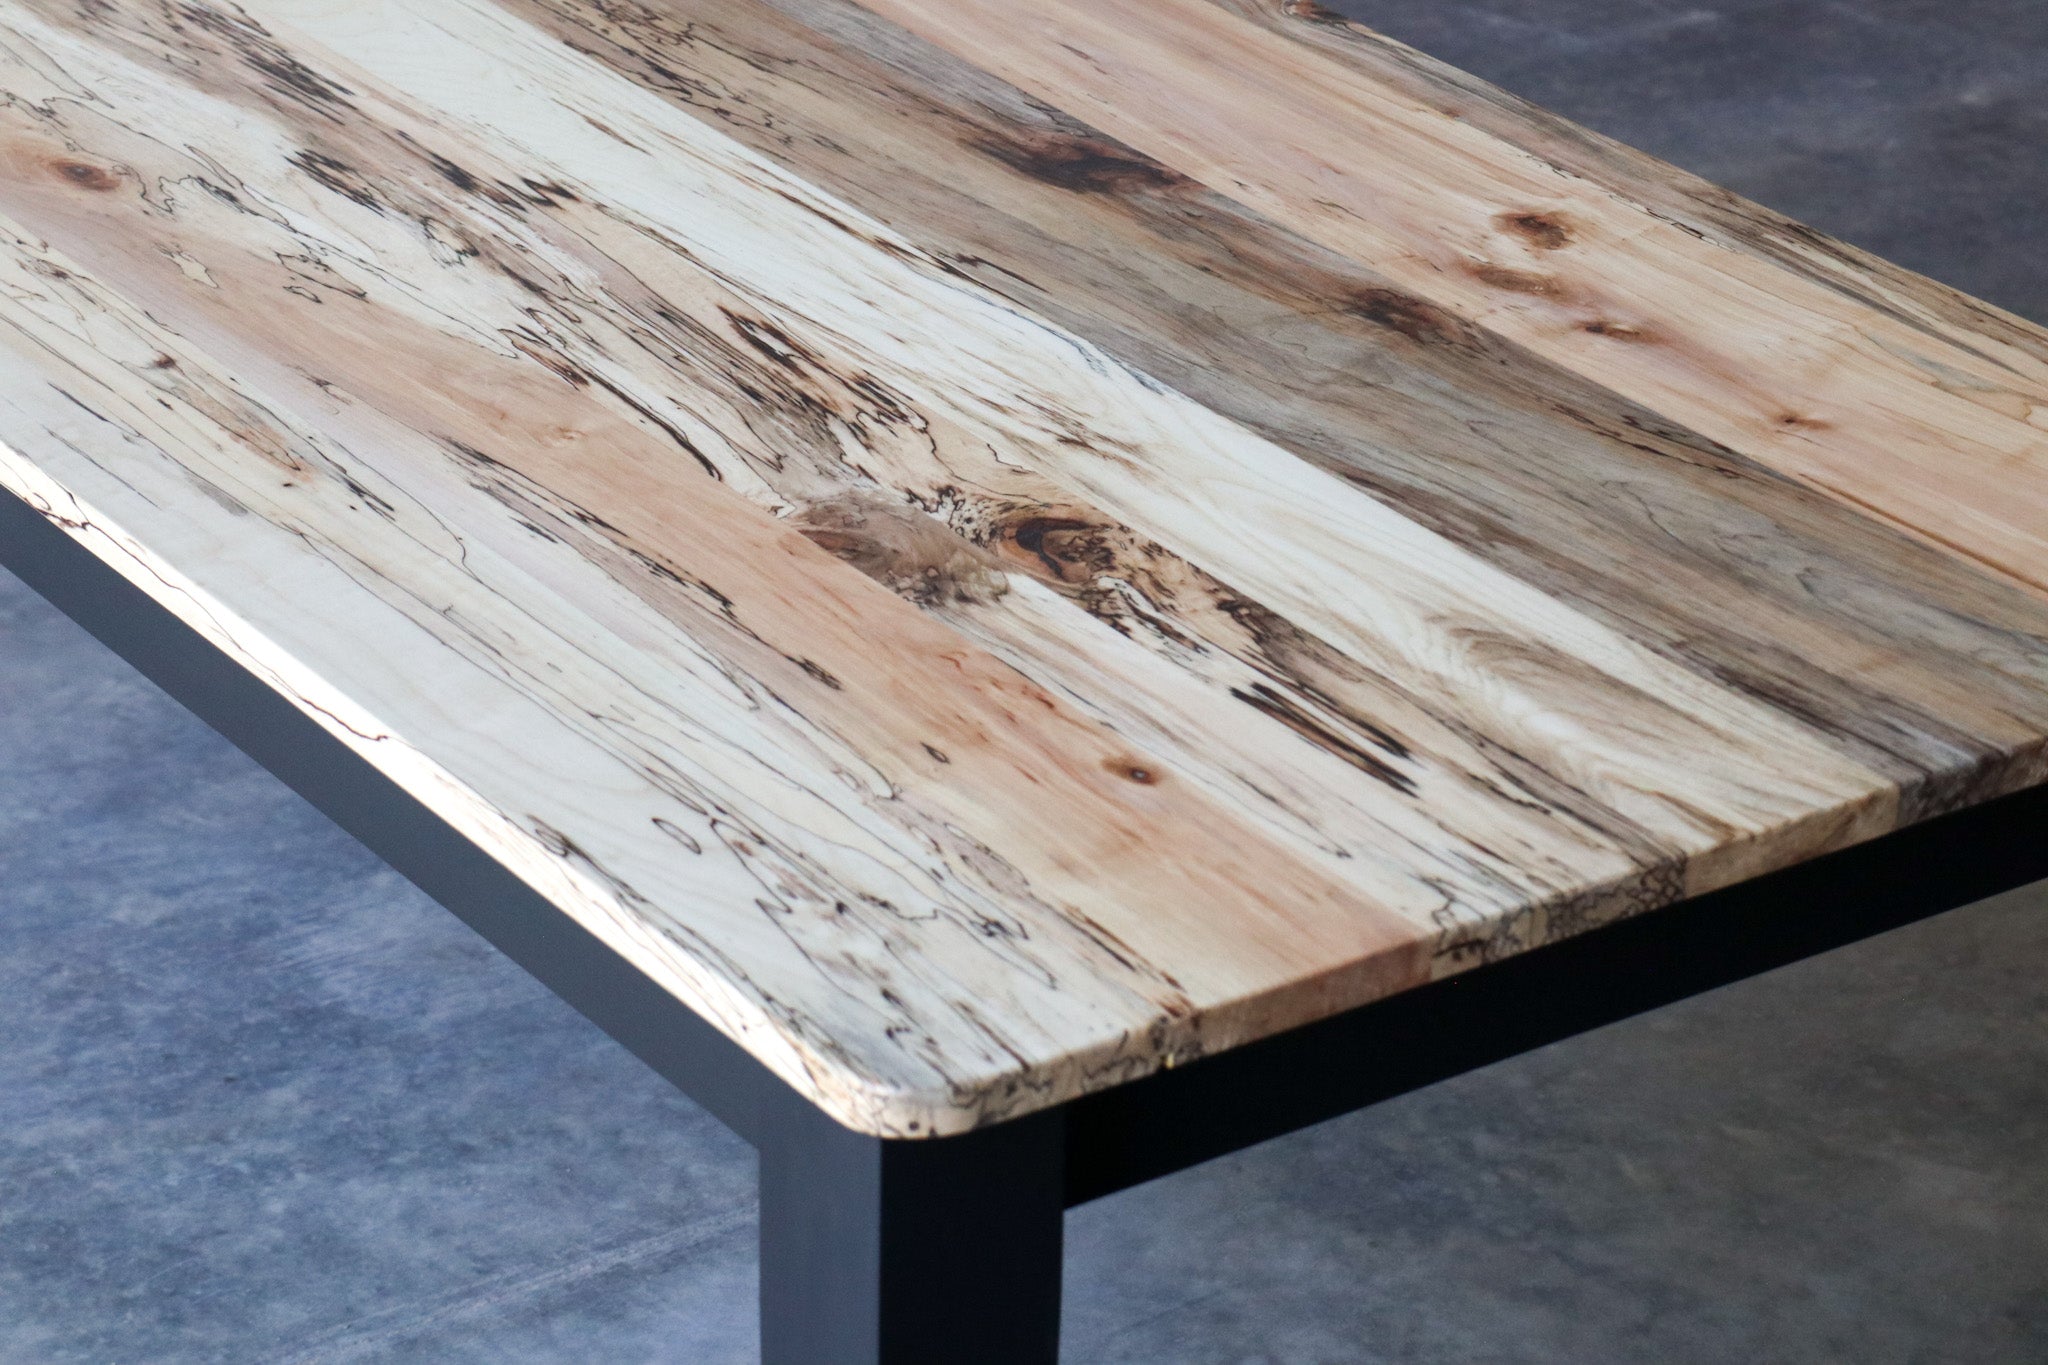 Spalted Maple Modern Shaker Dining Table, Flat Black Paint